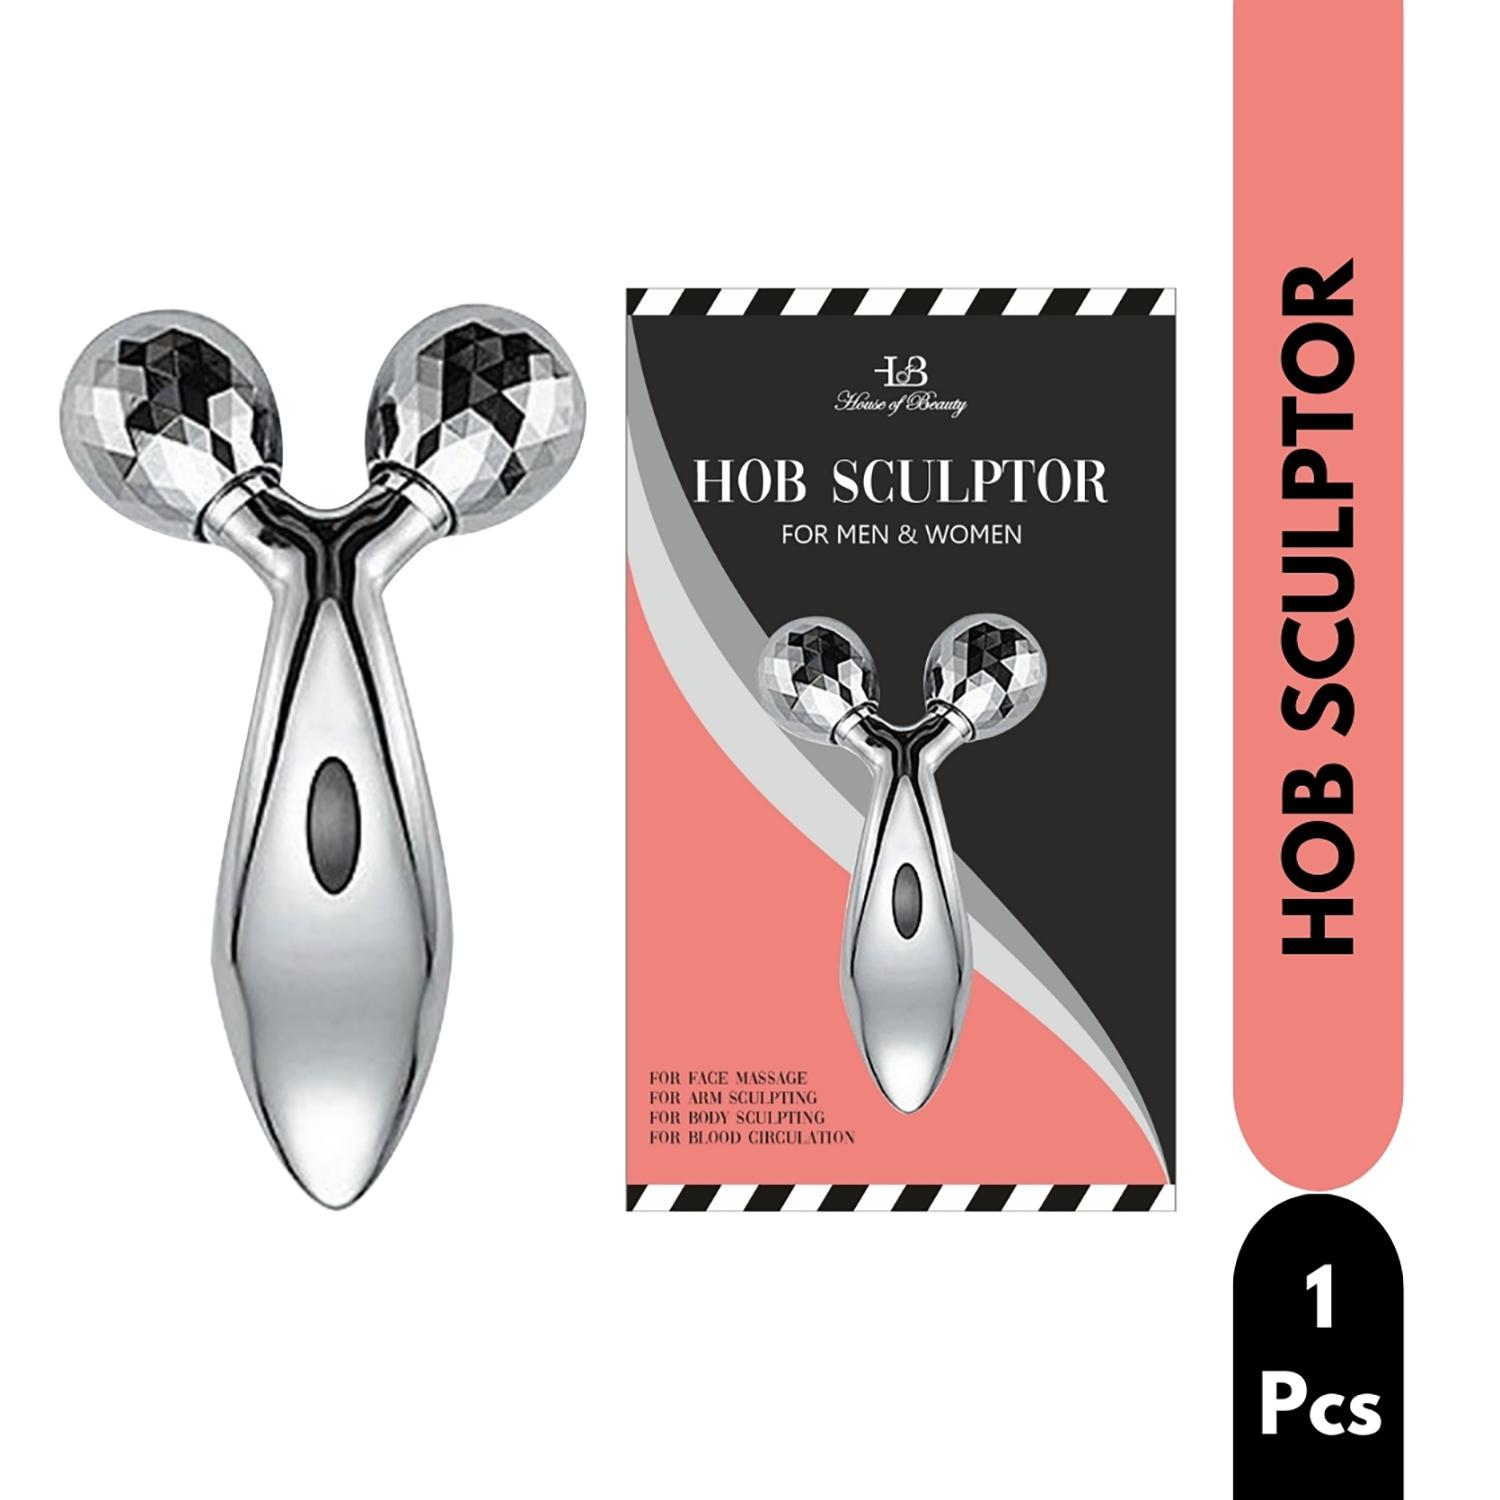 House of Beauty | House of Beauty 3D Sculptor Deep Tissue Massager Relieves Tension & Improves Circulation (1 Pc)